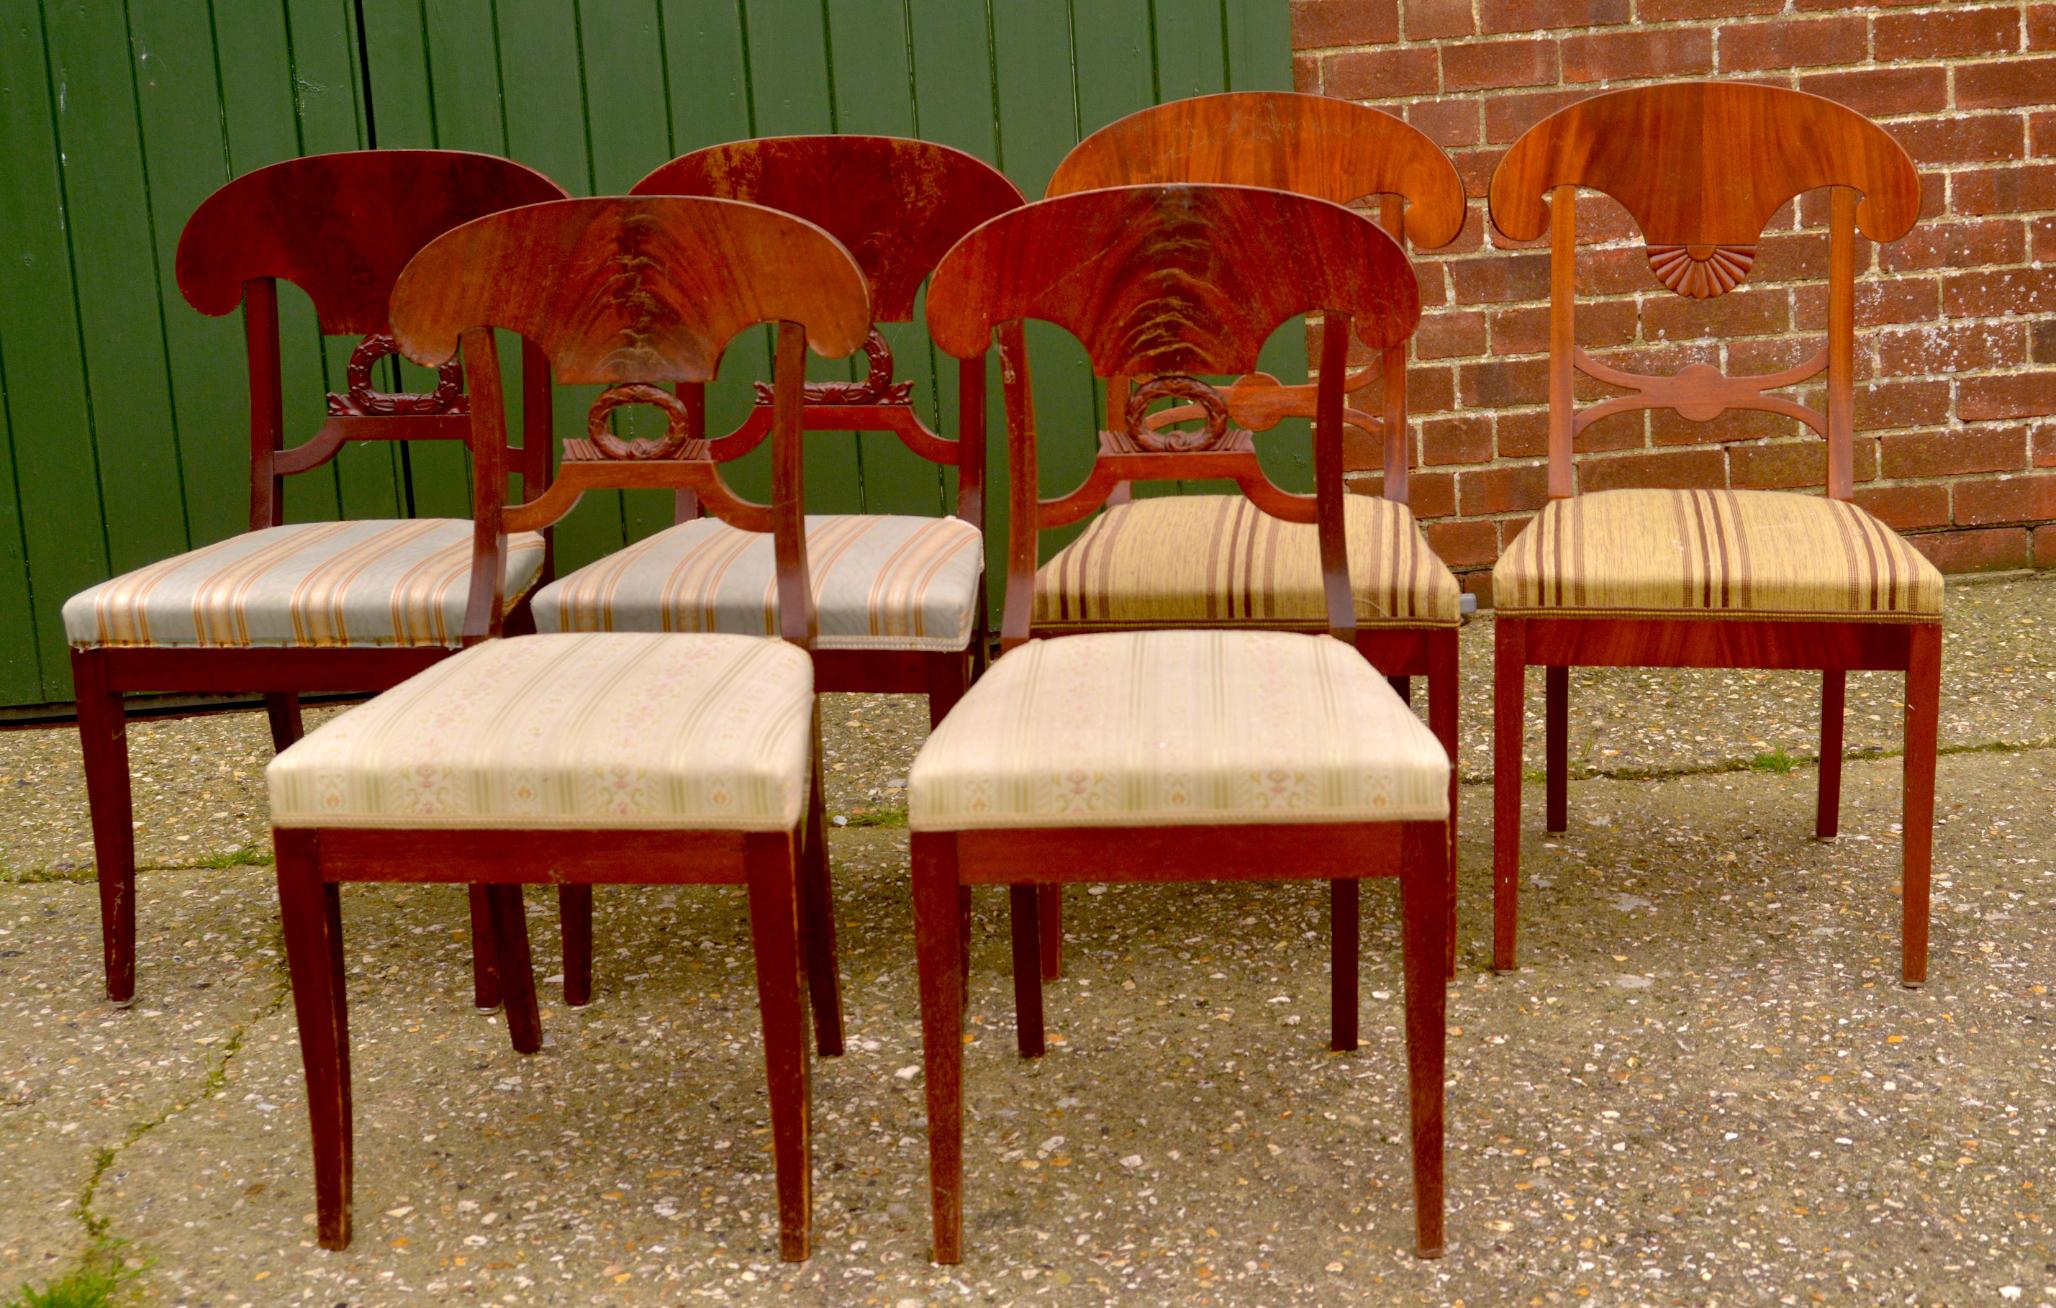 Unusual mixed set of antique Swedish flame mahogany Biedermeier dining chairs with the distinctive curved seat back, wreath and fan motifs and gracefully curved front legs.

The top grade flame veneers are brought to life in a rich darker french